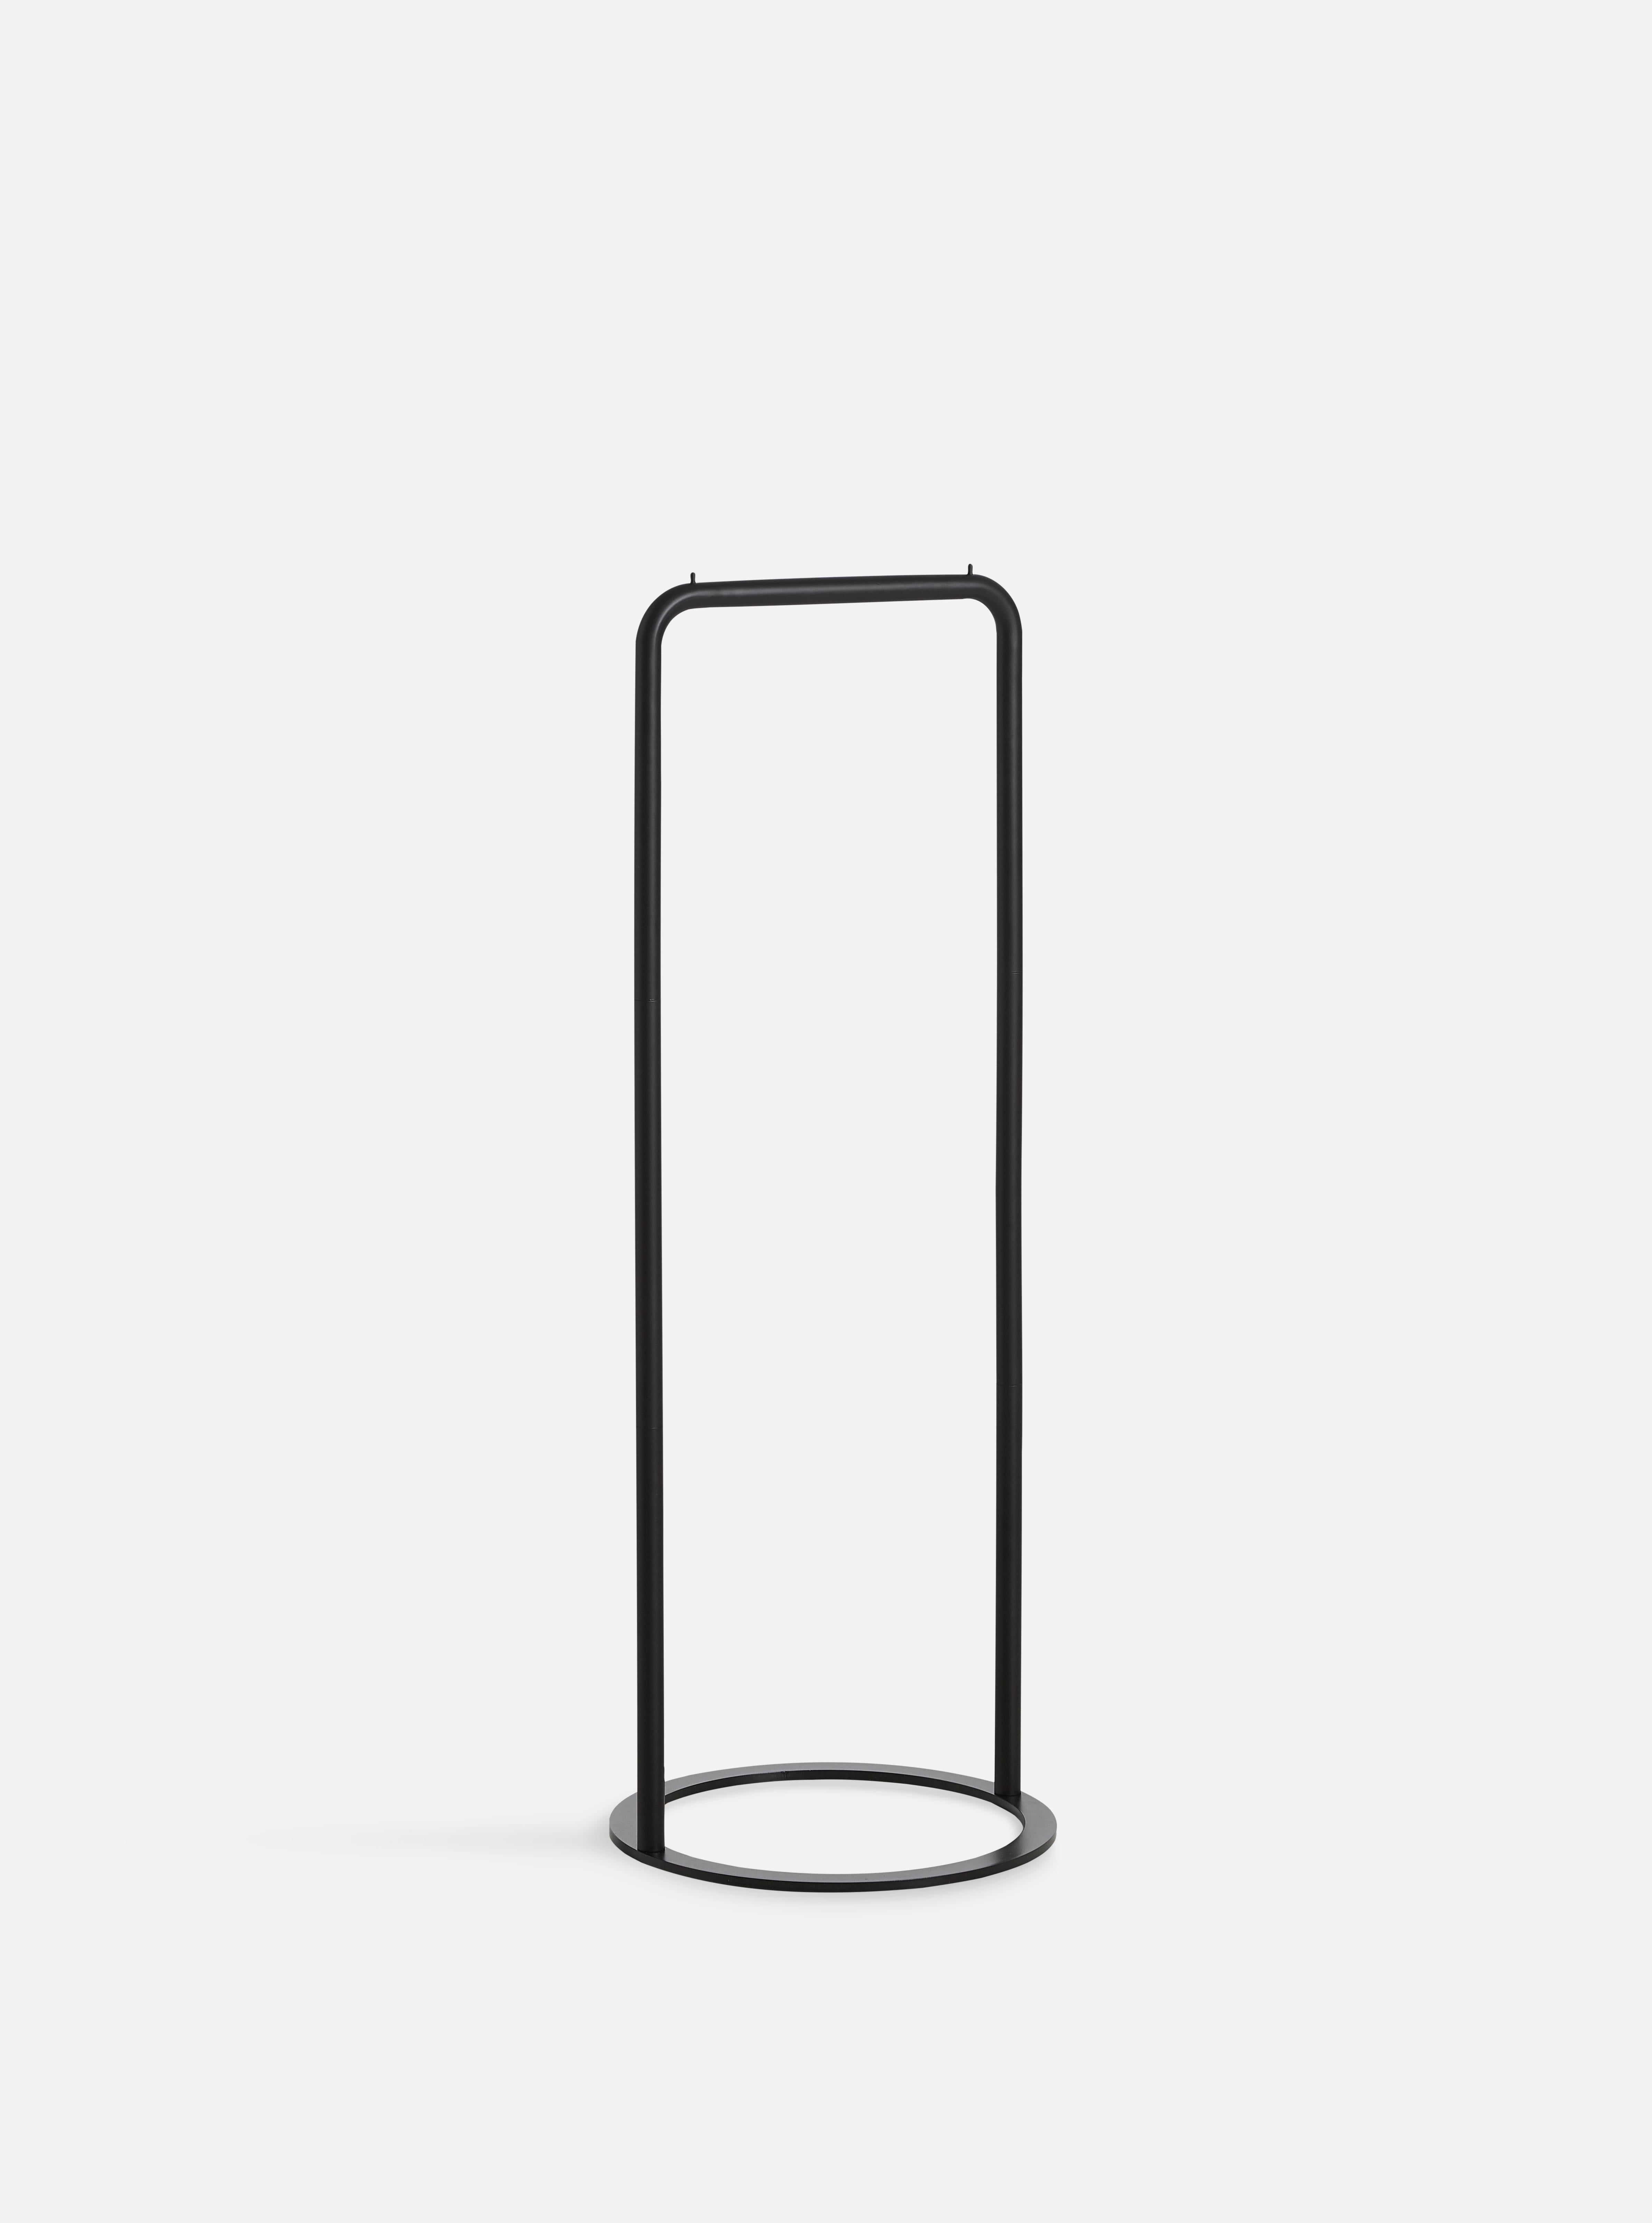 O & O clothes rack small by Christine Rathmann.
Materials: Metal.
Dimensions: D 41 x H 117 cm.
Also available in different dimensions.

The founders, Mia and Torben Koed, decided to put their 30 years of experience into a new project. It was